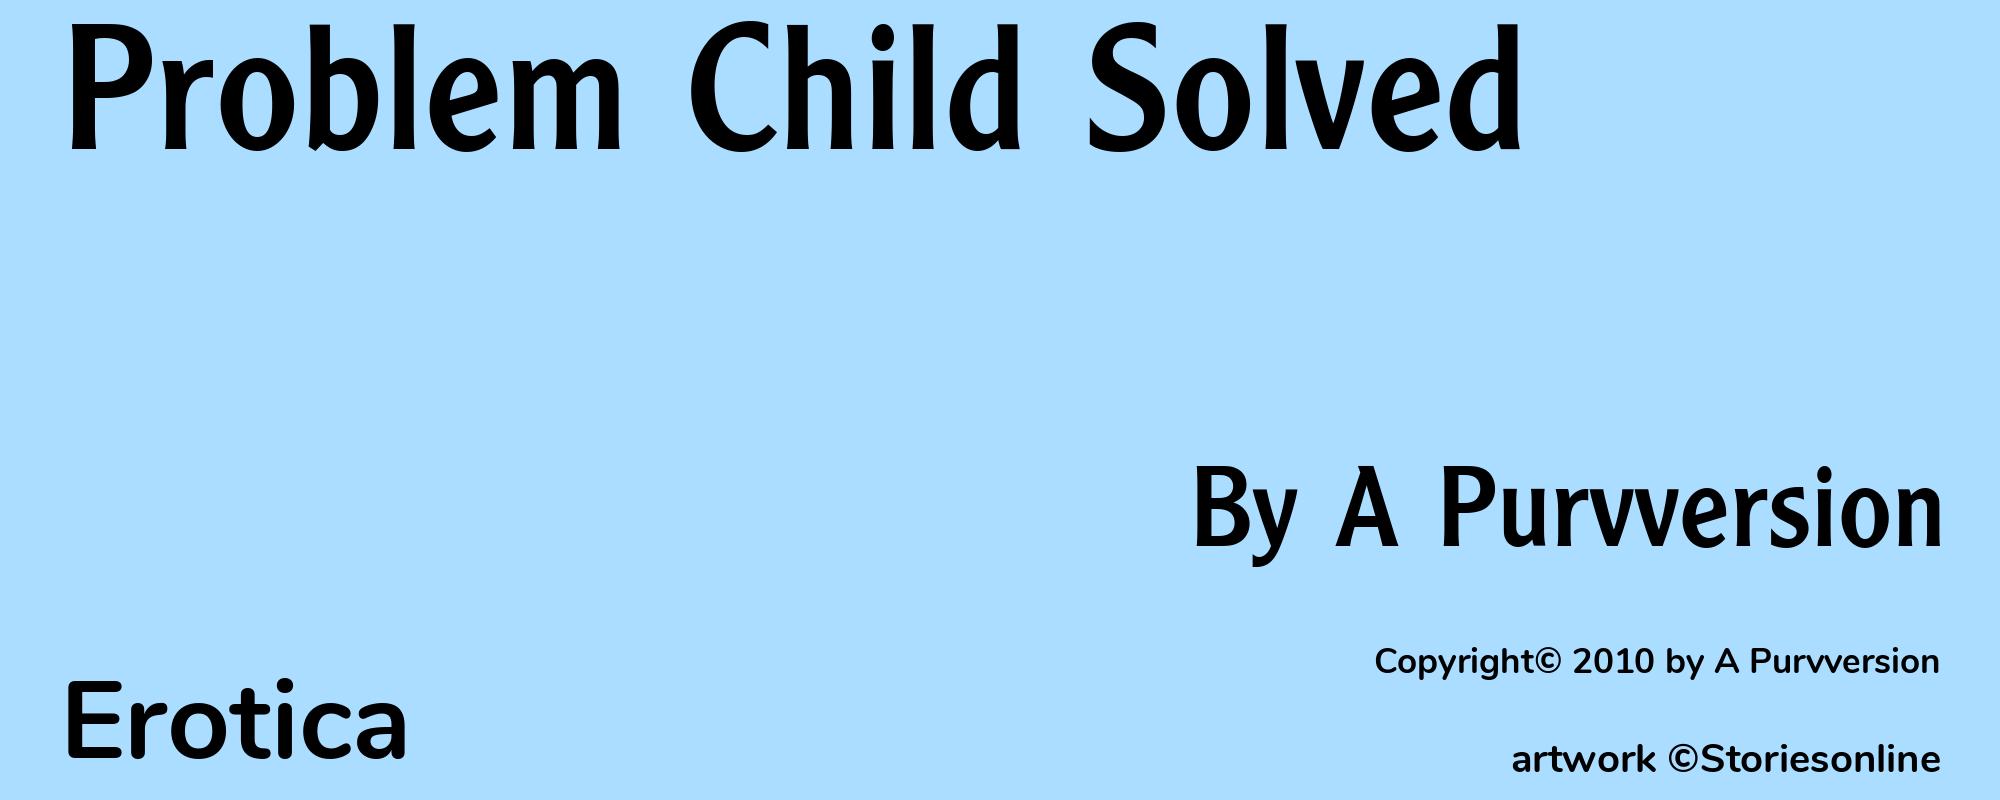 Problem Child Solved - Cover